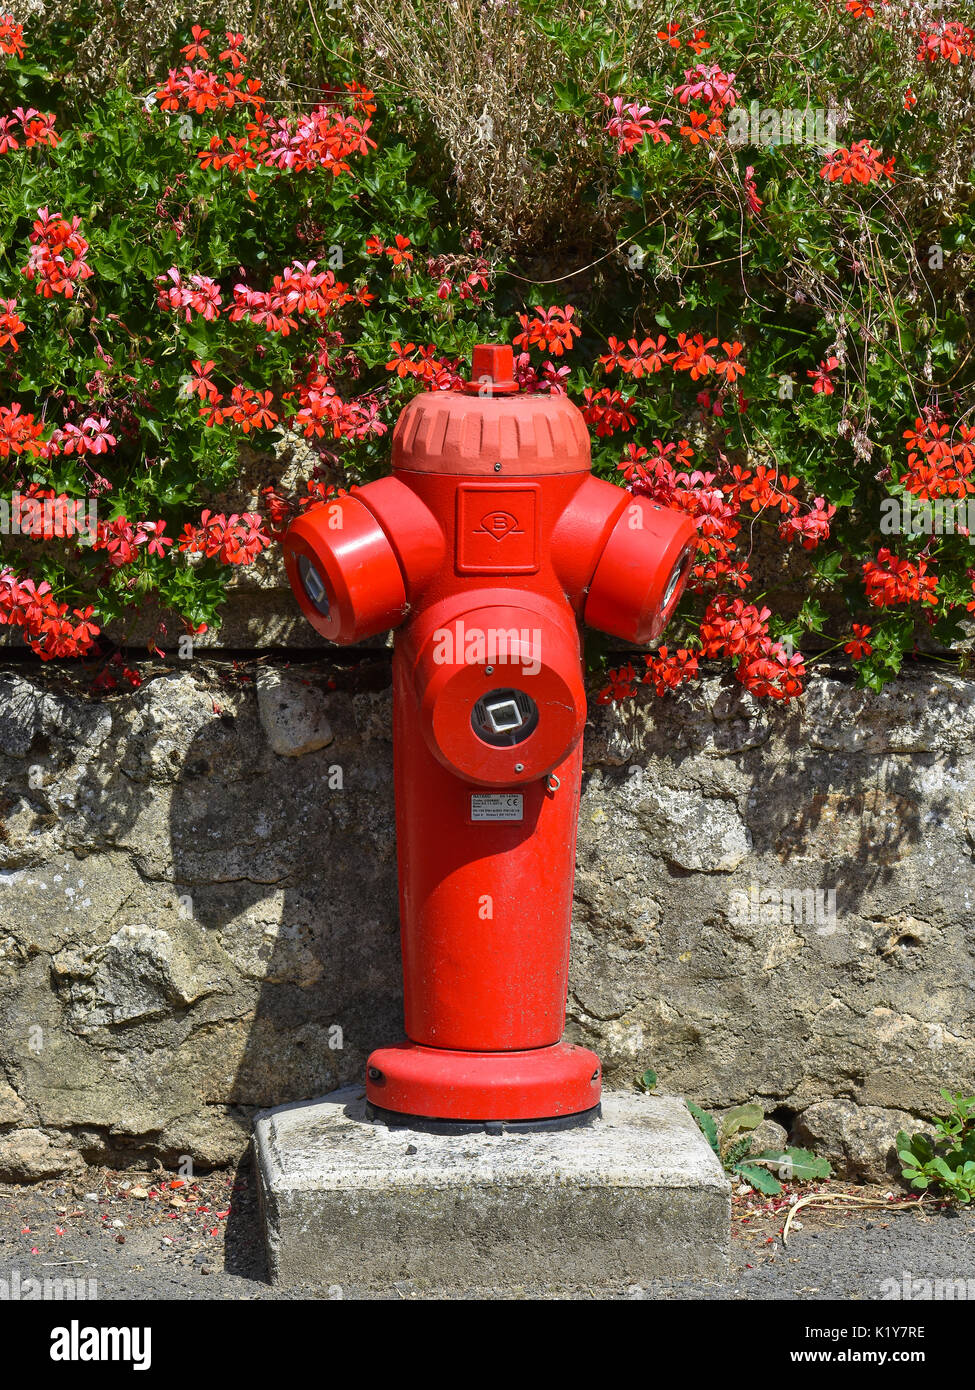 Red fire hydrant and geraniums, France. Stock Photo